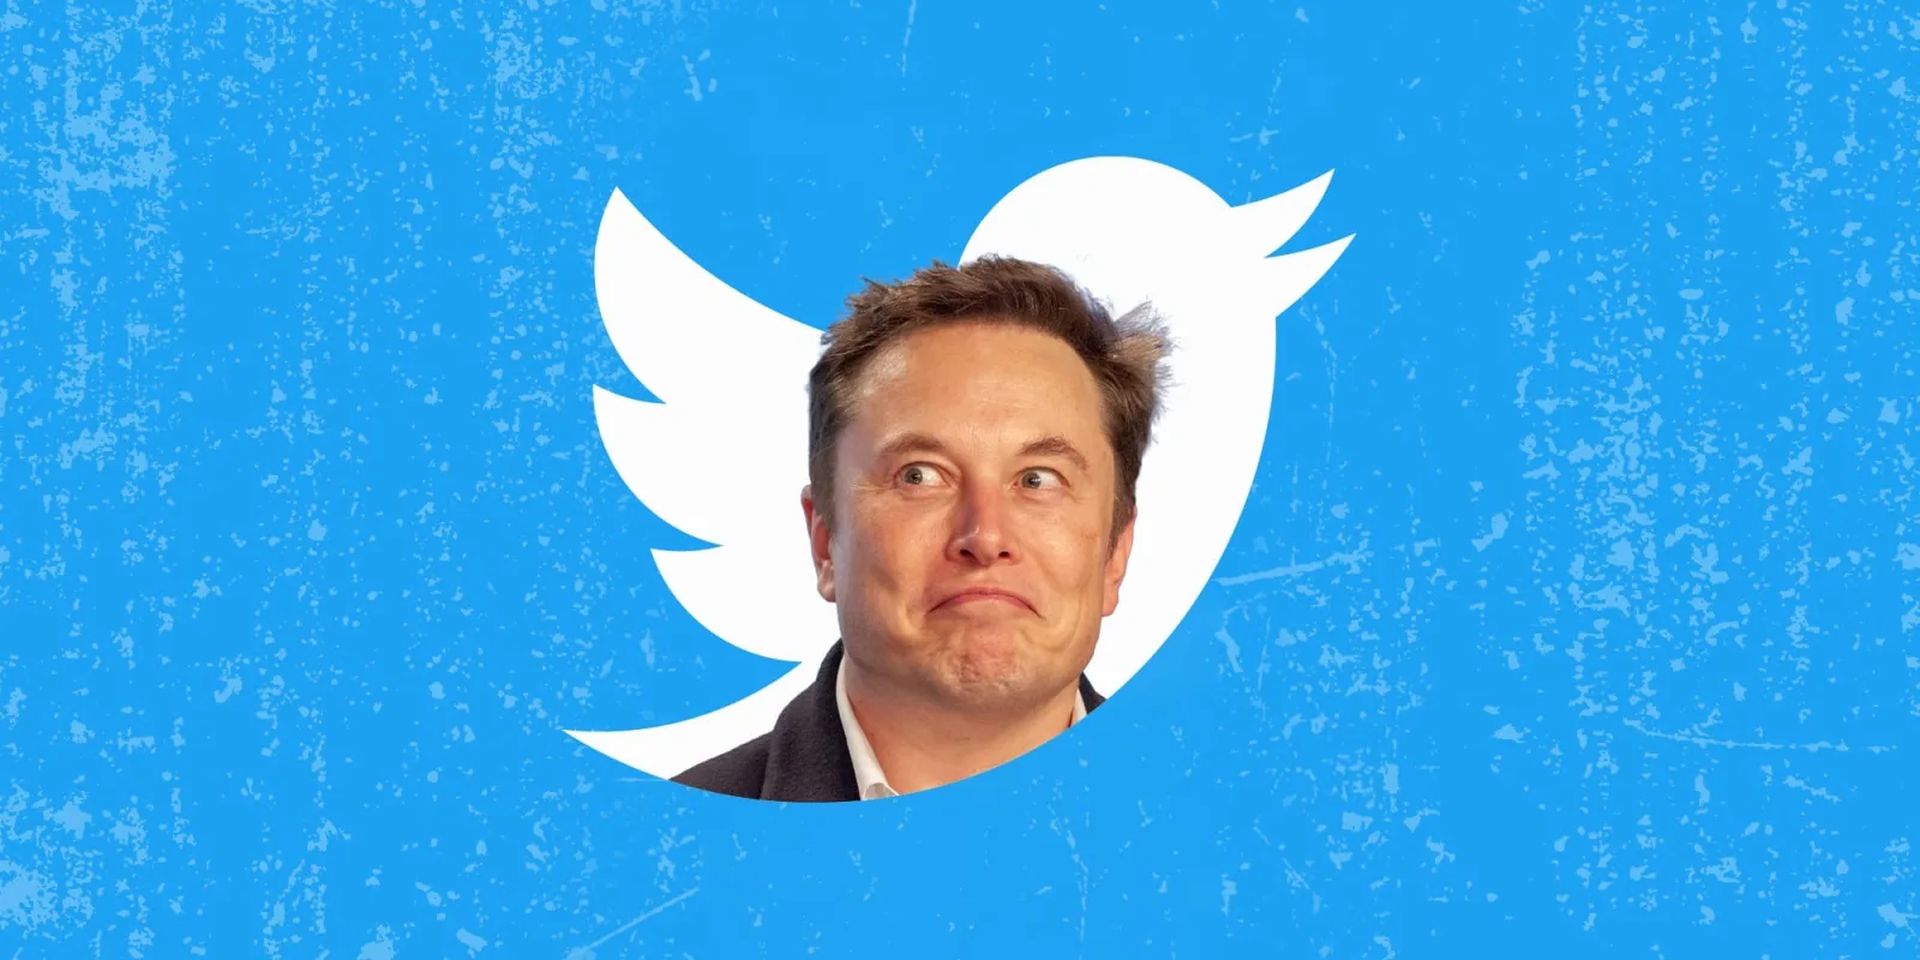 Twitter days of rest are now a thing of the past under new owner Elon Musk. During the early days of the COVID-19 epidemic, Twitter began giving one...